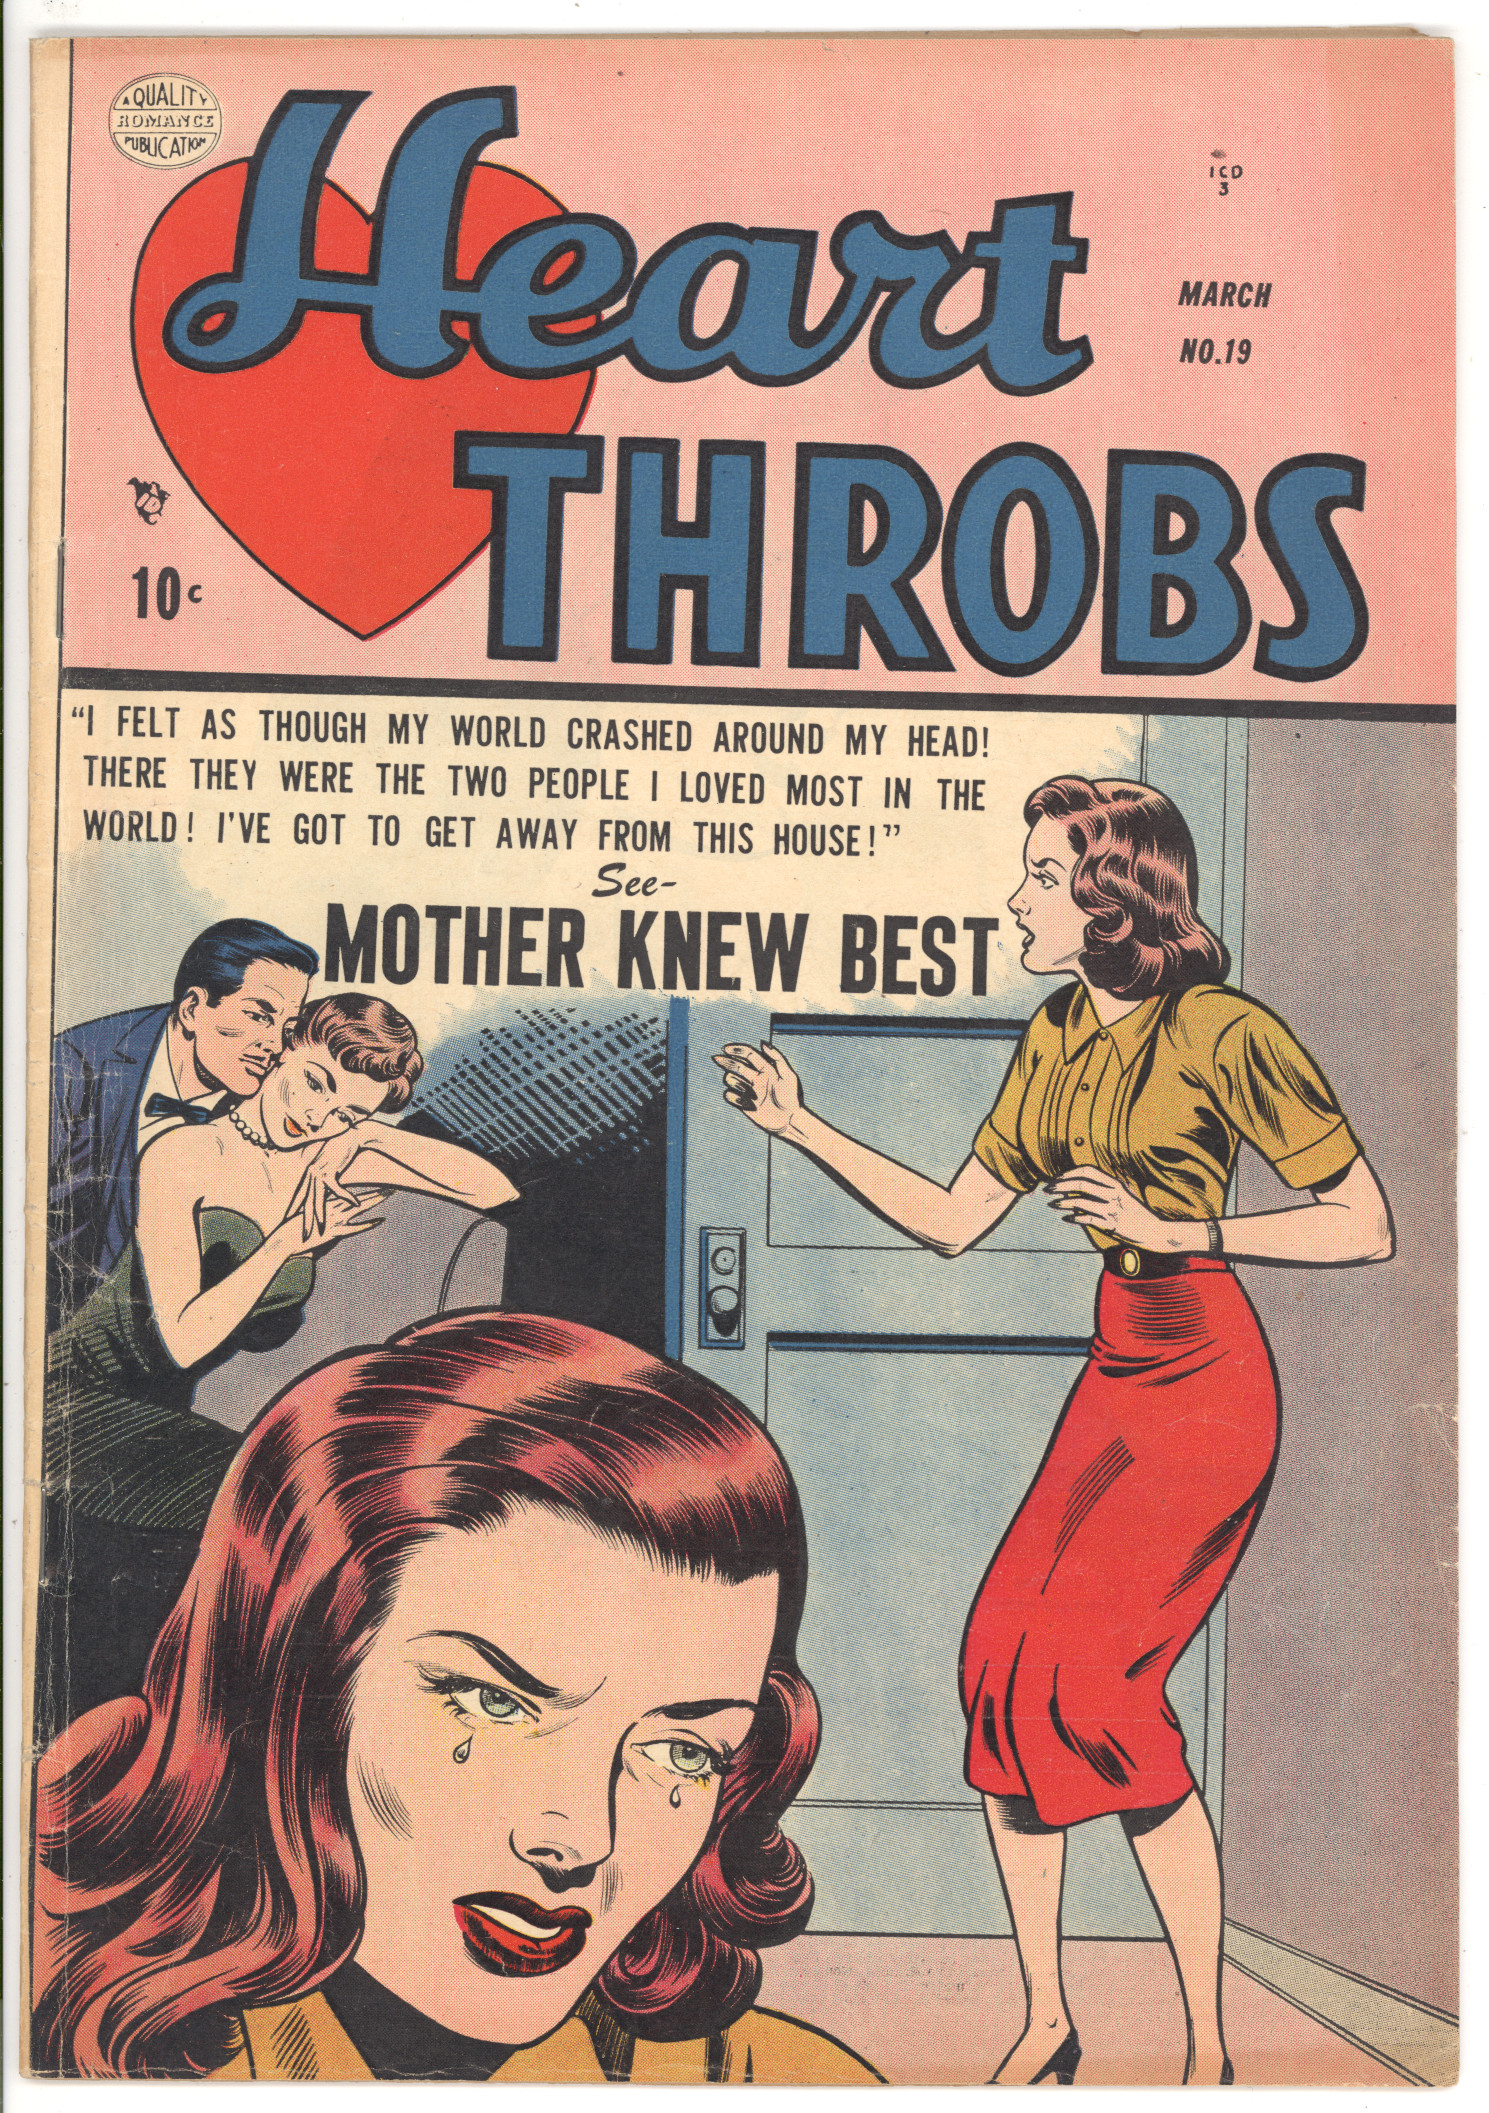 Heart Throbs #19 front